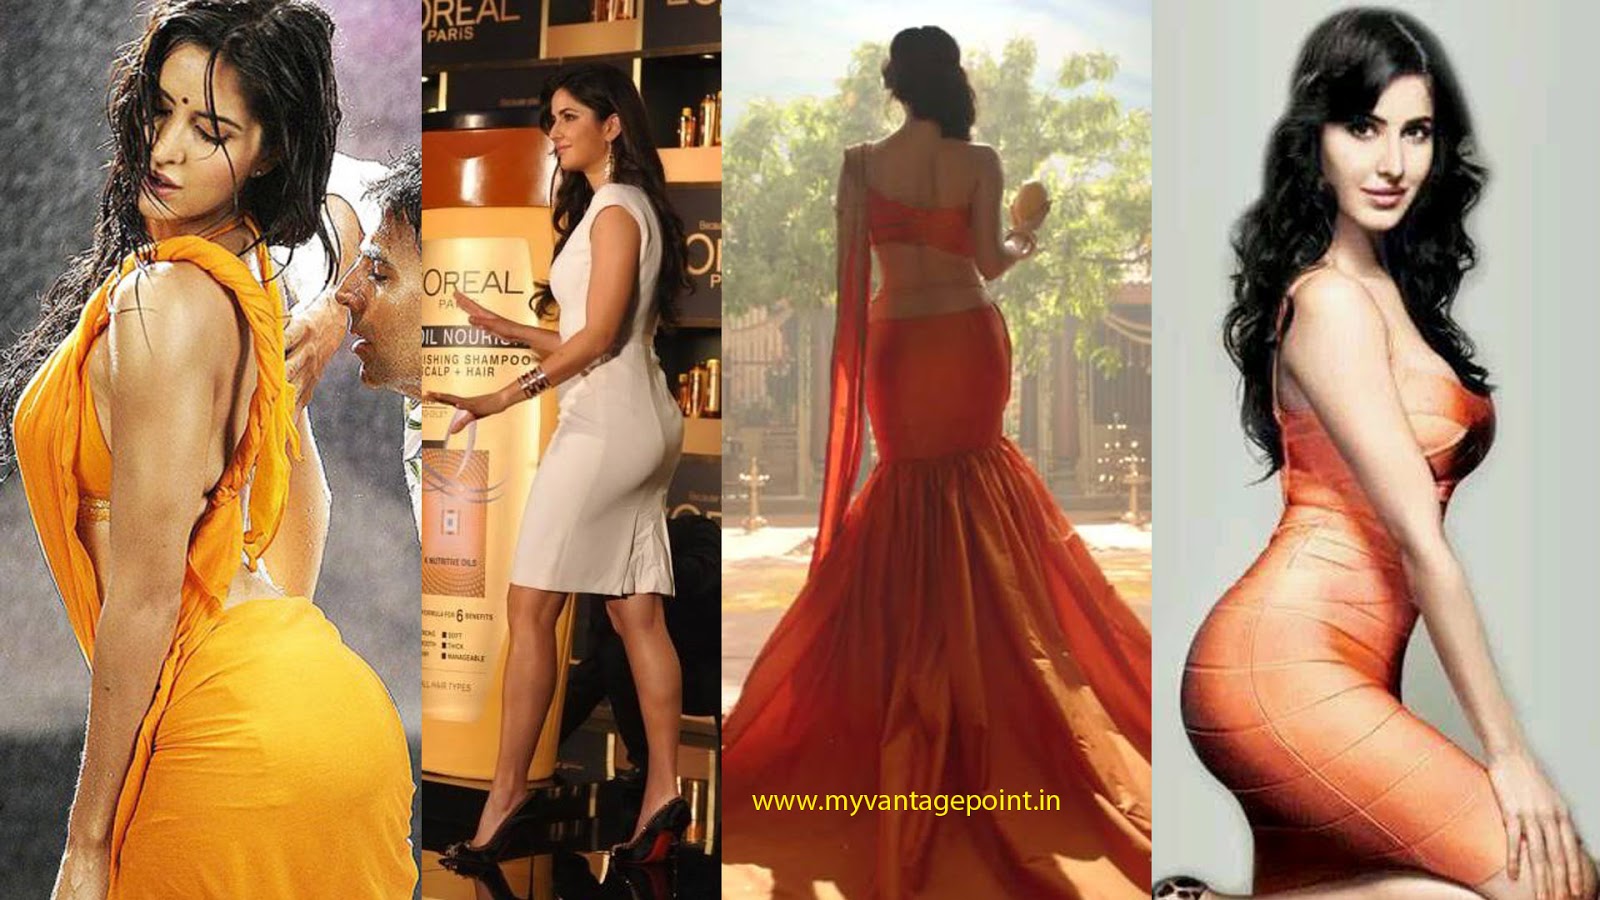 Top 10 Sexiest Butts In Bollywood Film Industry  List-7703